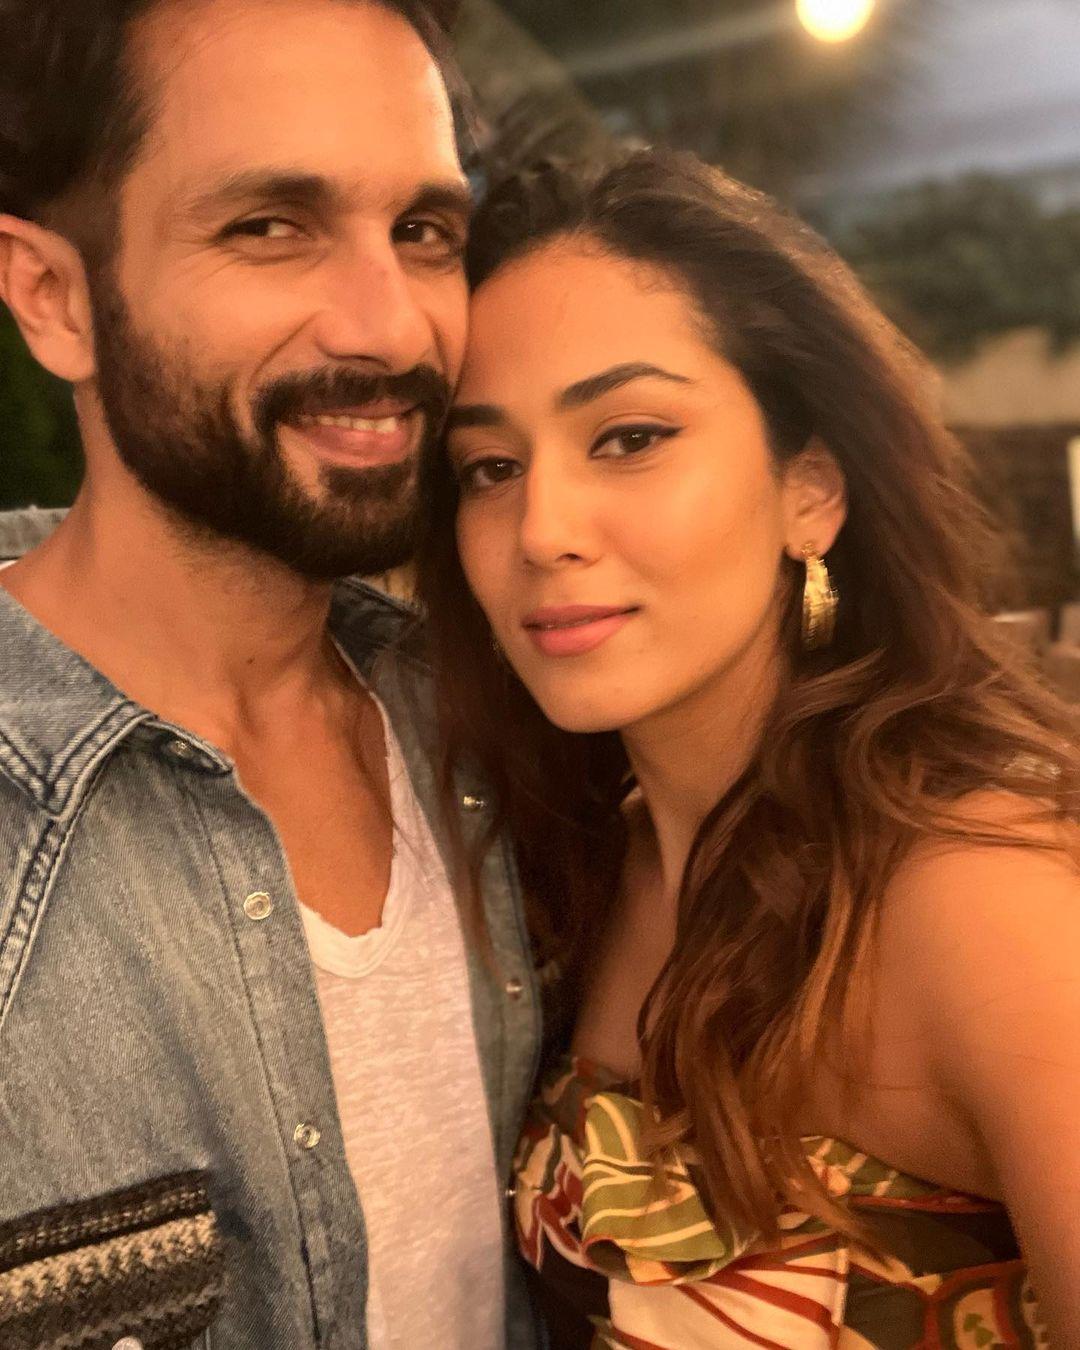 Shahid Kapoor and Mira Rajput are one of the most loved couples in the industry. The two always make their fans go crazy with their pictures together. As Valentine's Day is just tomorrow, take inspiration from Shahid and Mira's this look to ace your date night 'fit